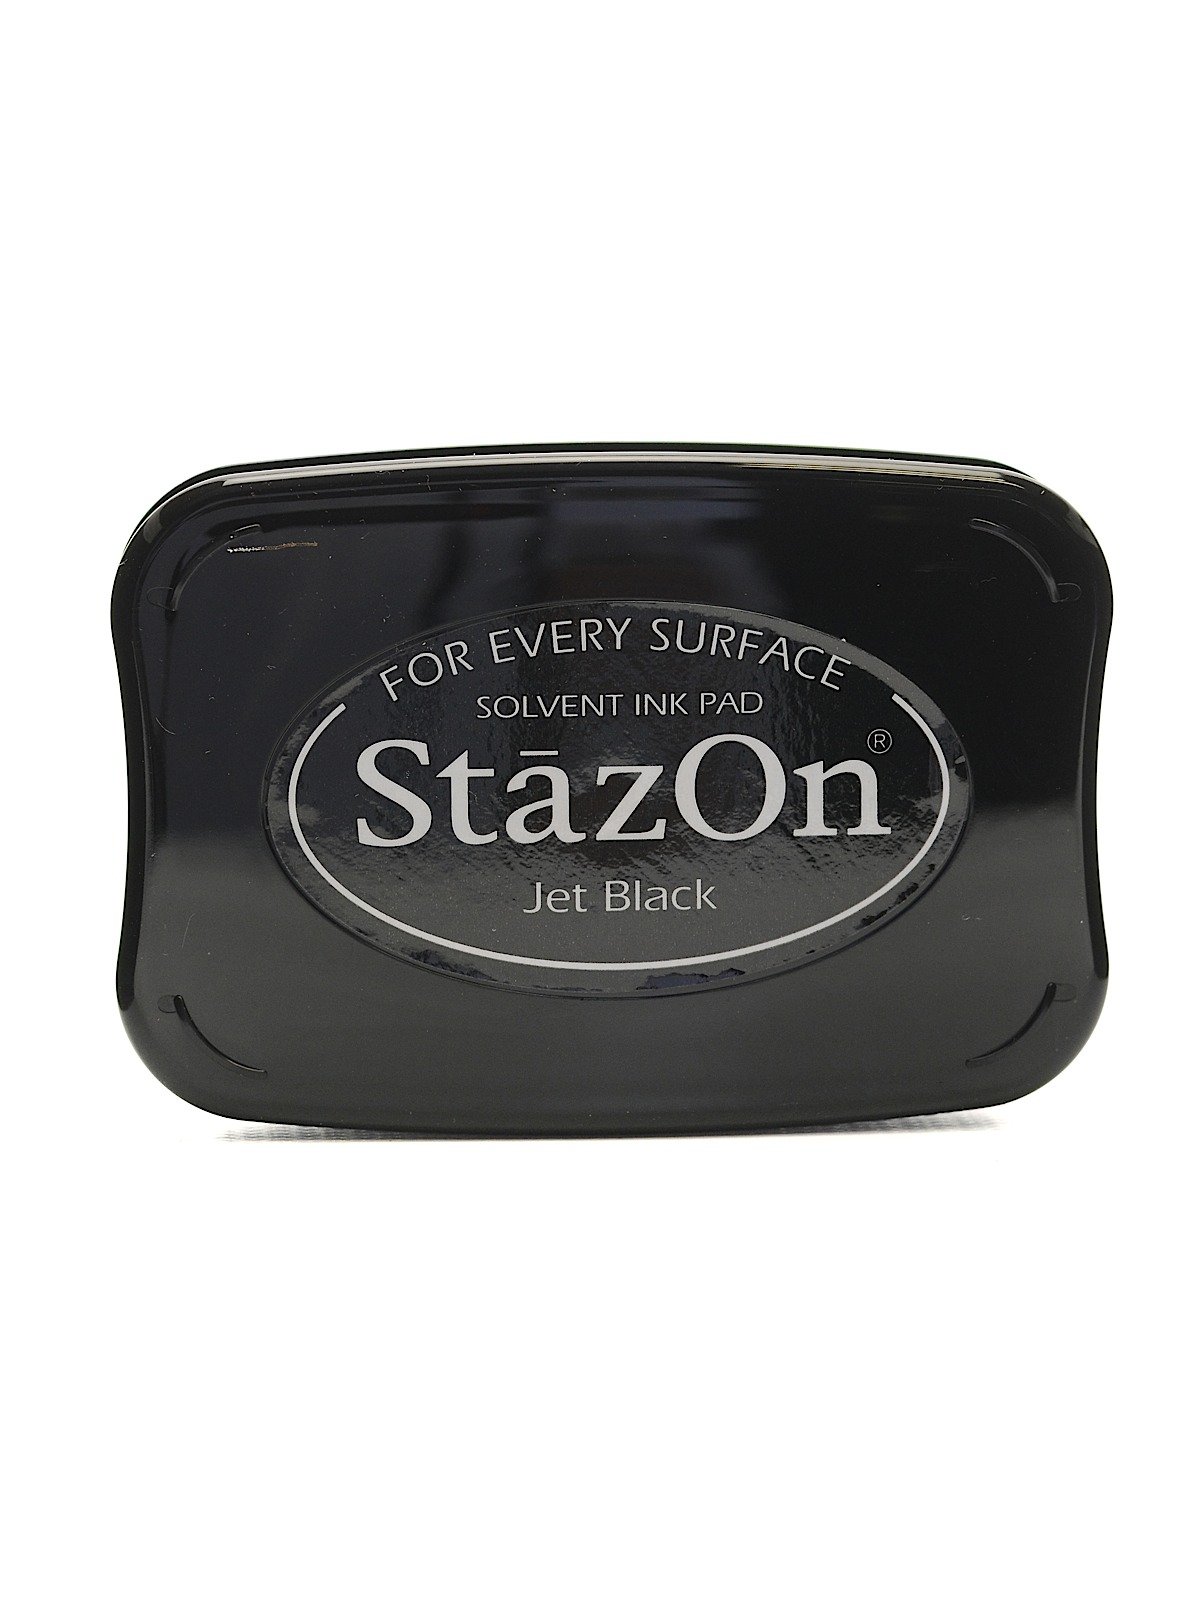 TSUKINEKO STAZON INK PAD SOLVENT BASED FOR RUBBER STAMPS STAMPING